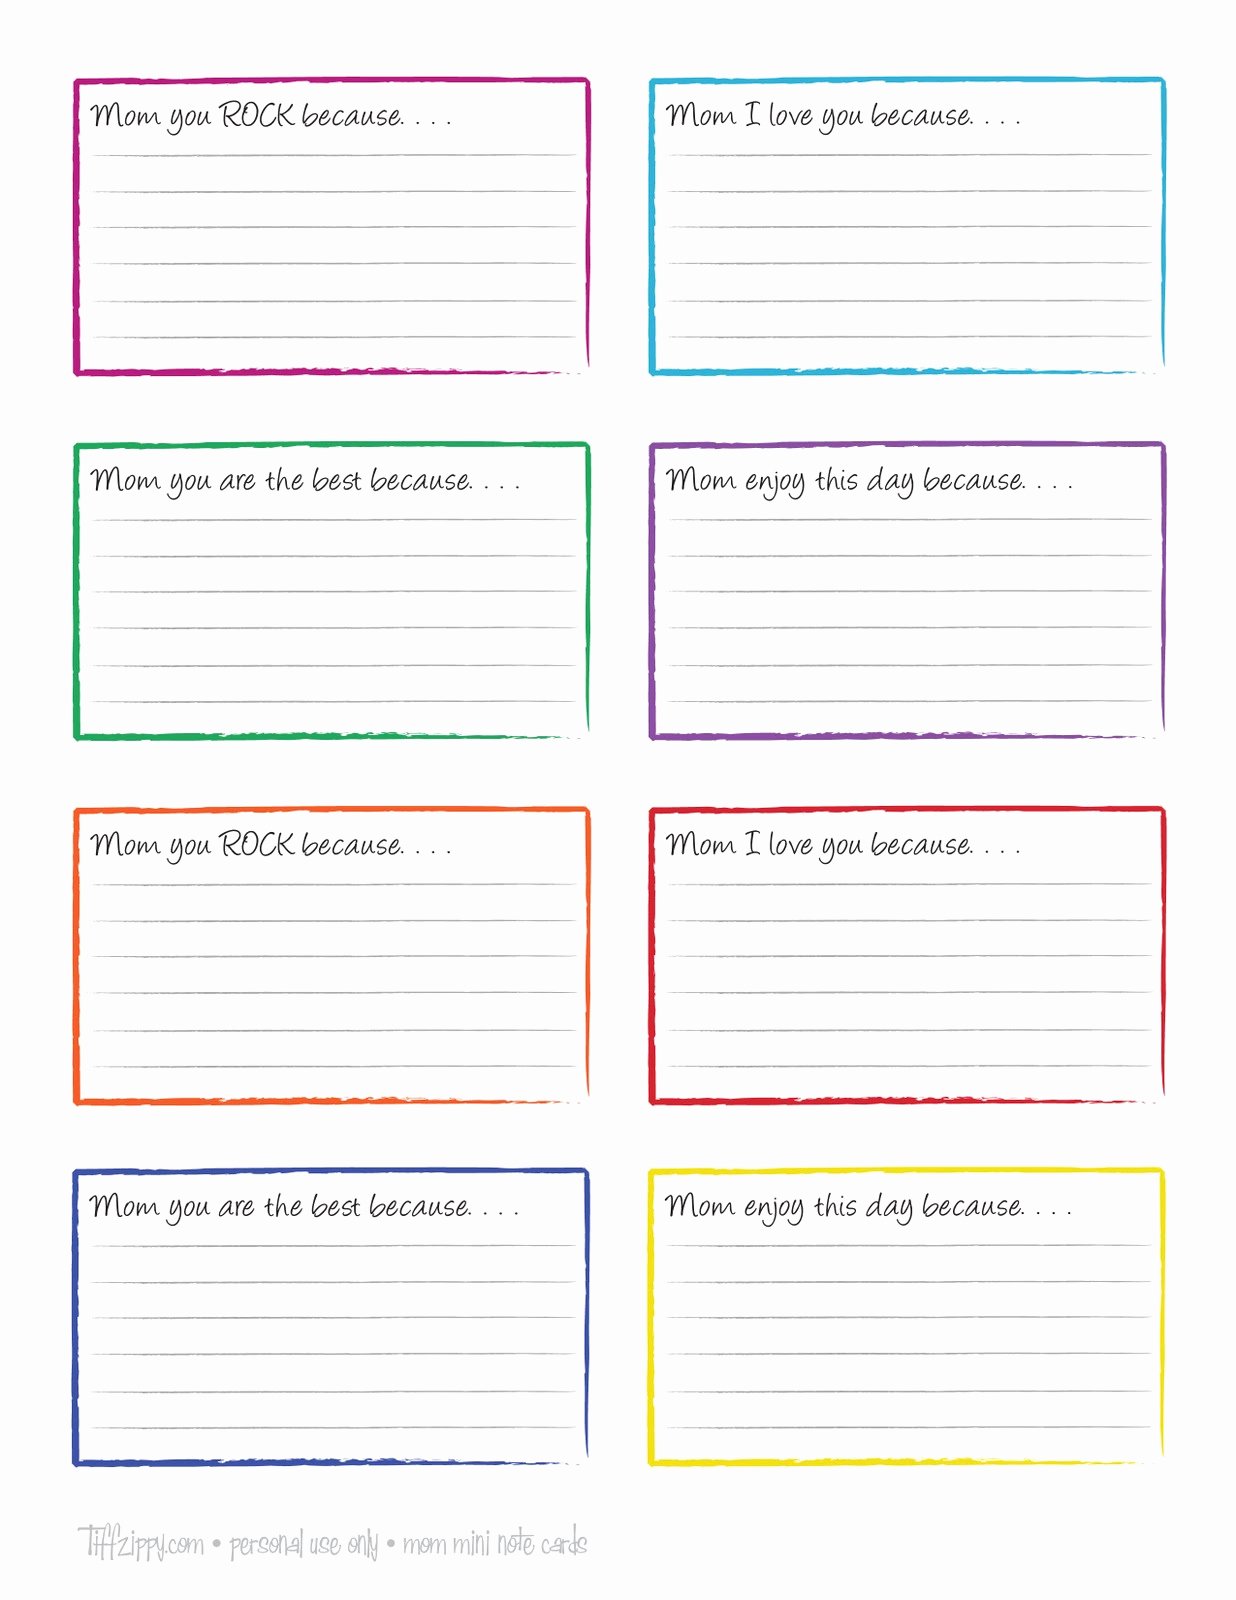 Free Printable Note Cards Template Beautiful Tiffzippy Just Zipping Through Free Printable Mom